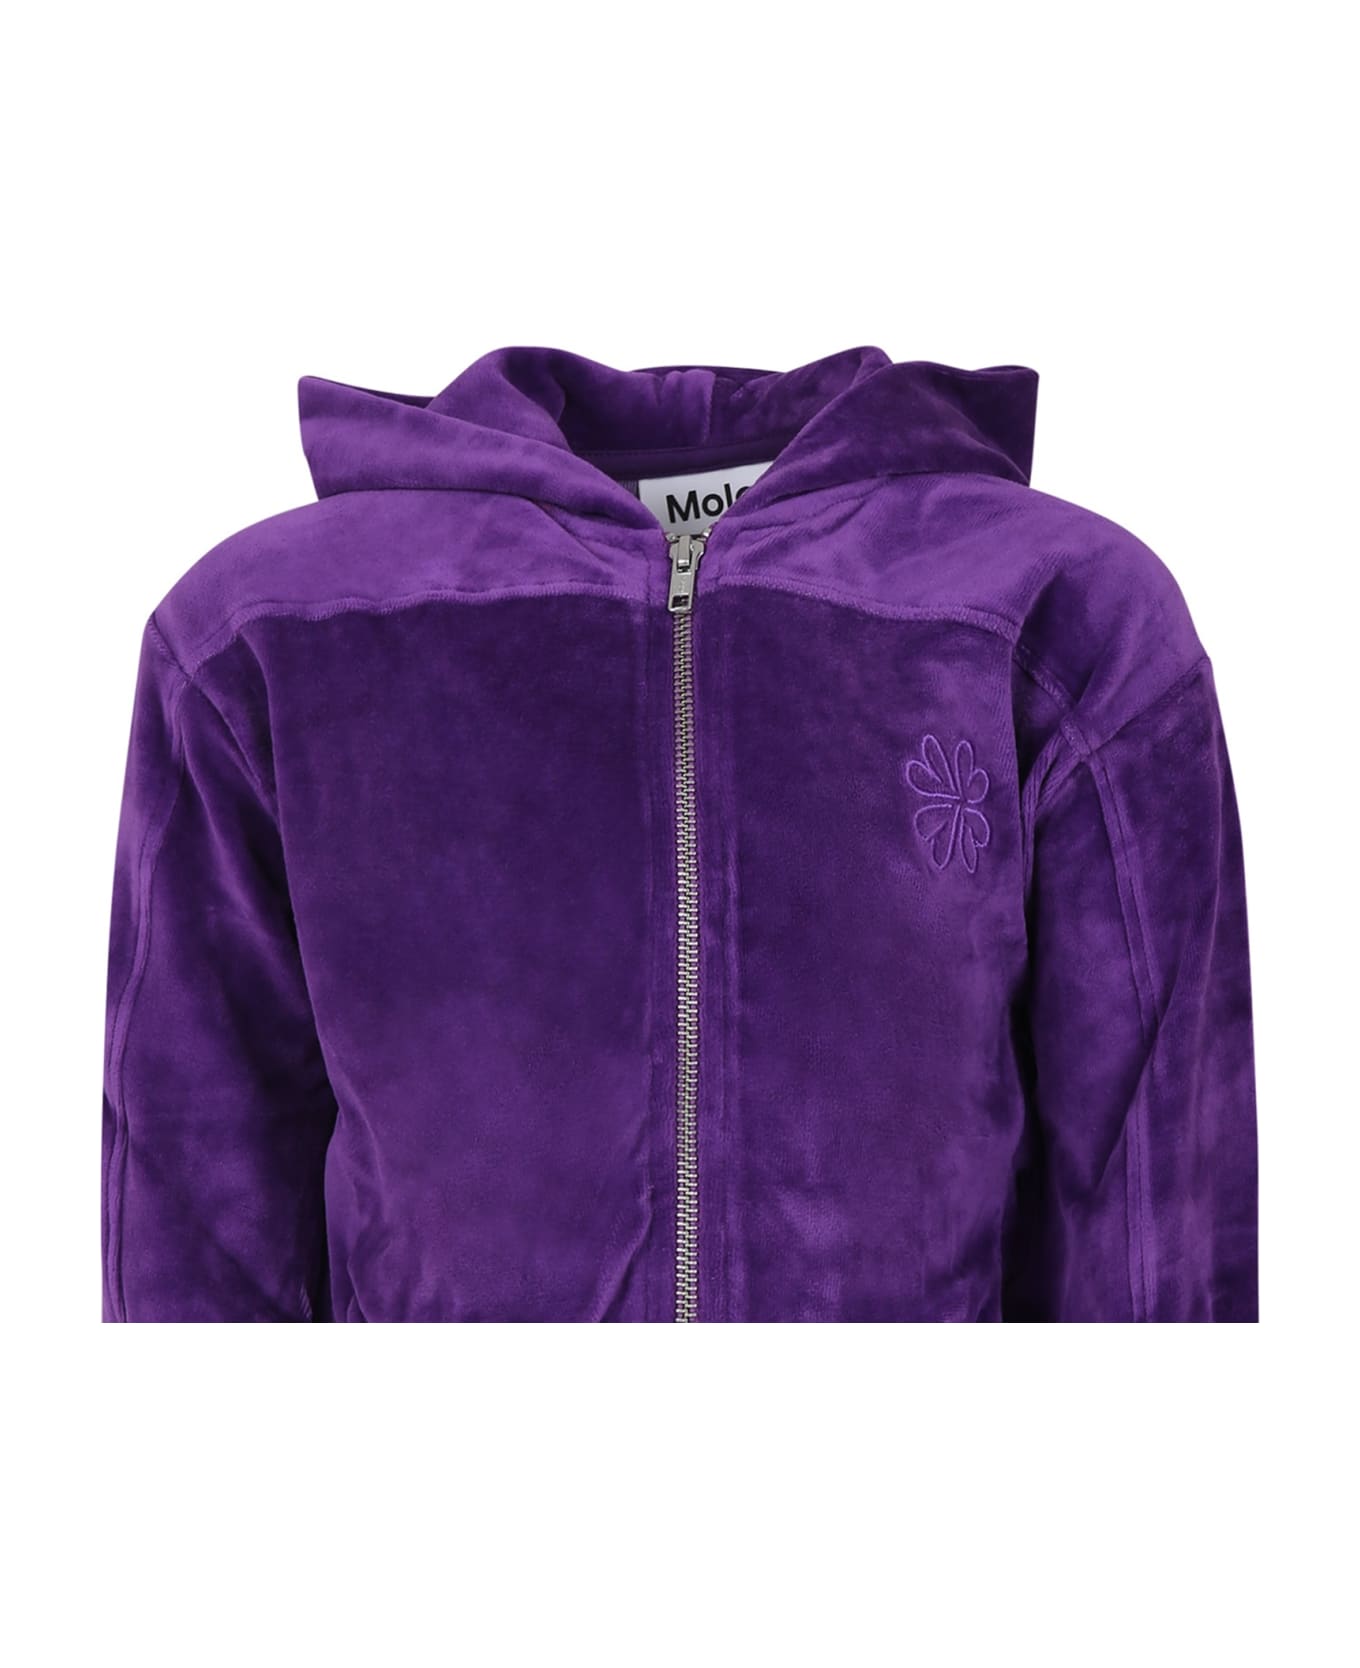 Molo Purple Sweatshirt For Girls With Embroidery - Violet